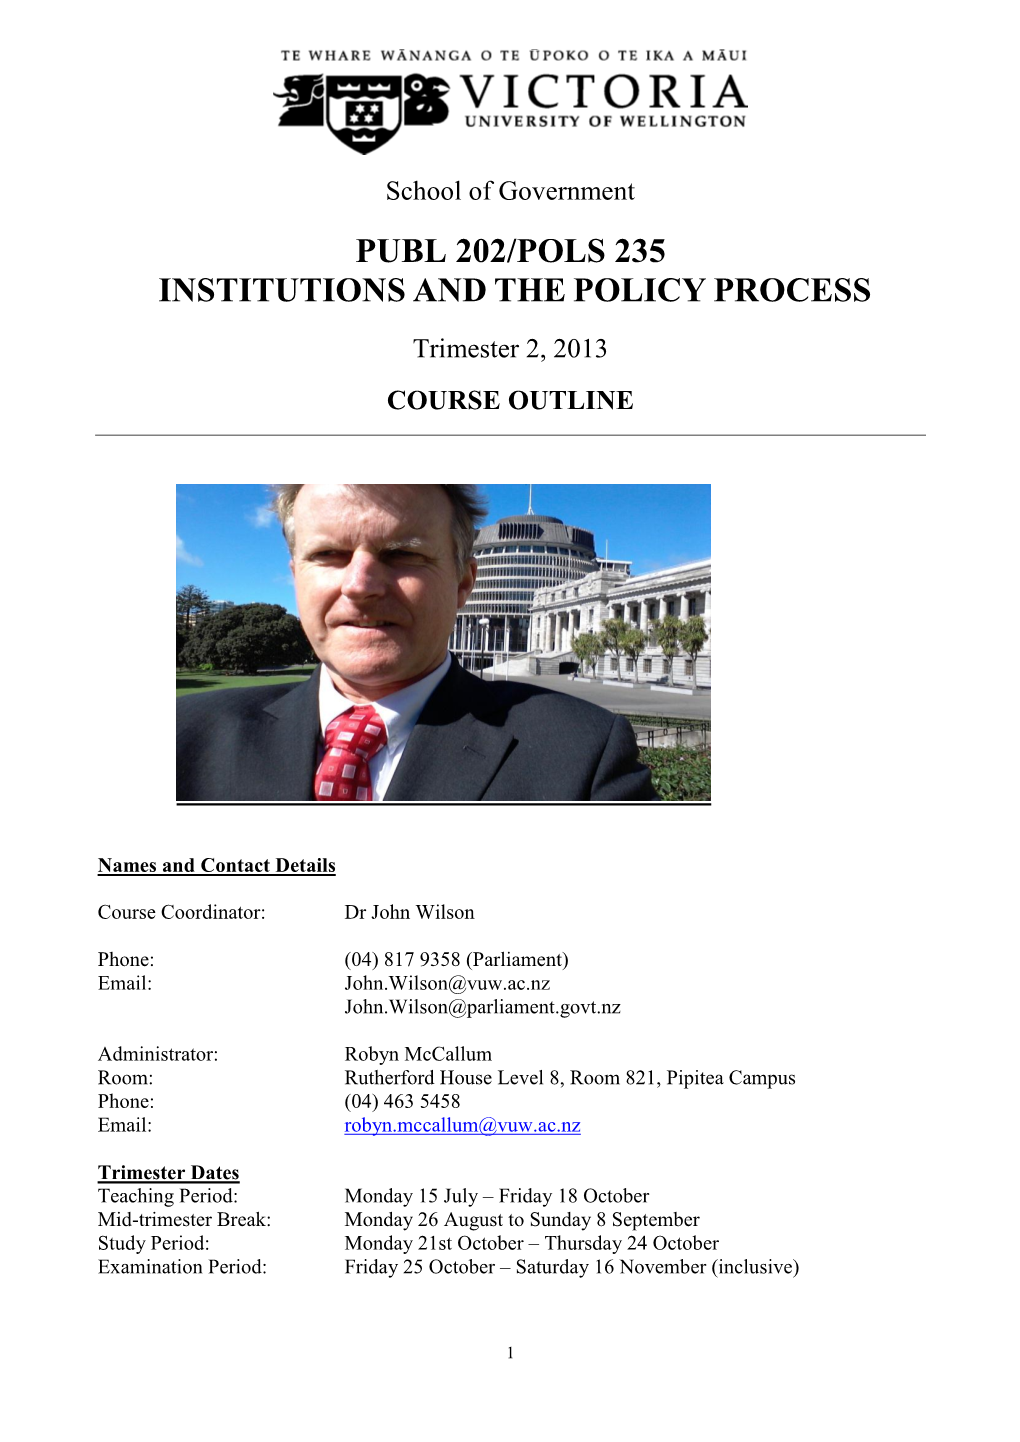 Publ 202/Pols 235 Institutions and the Policy Process